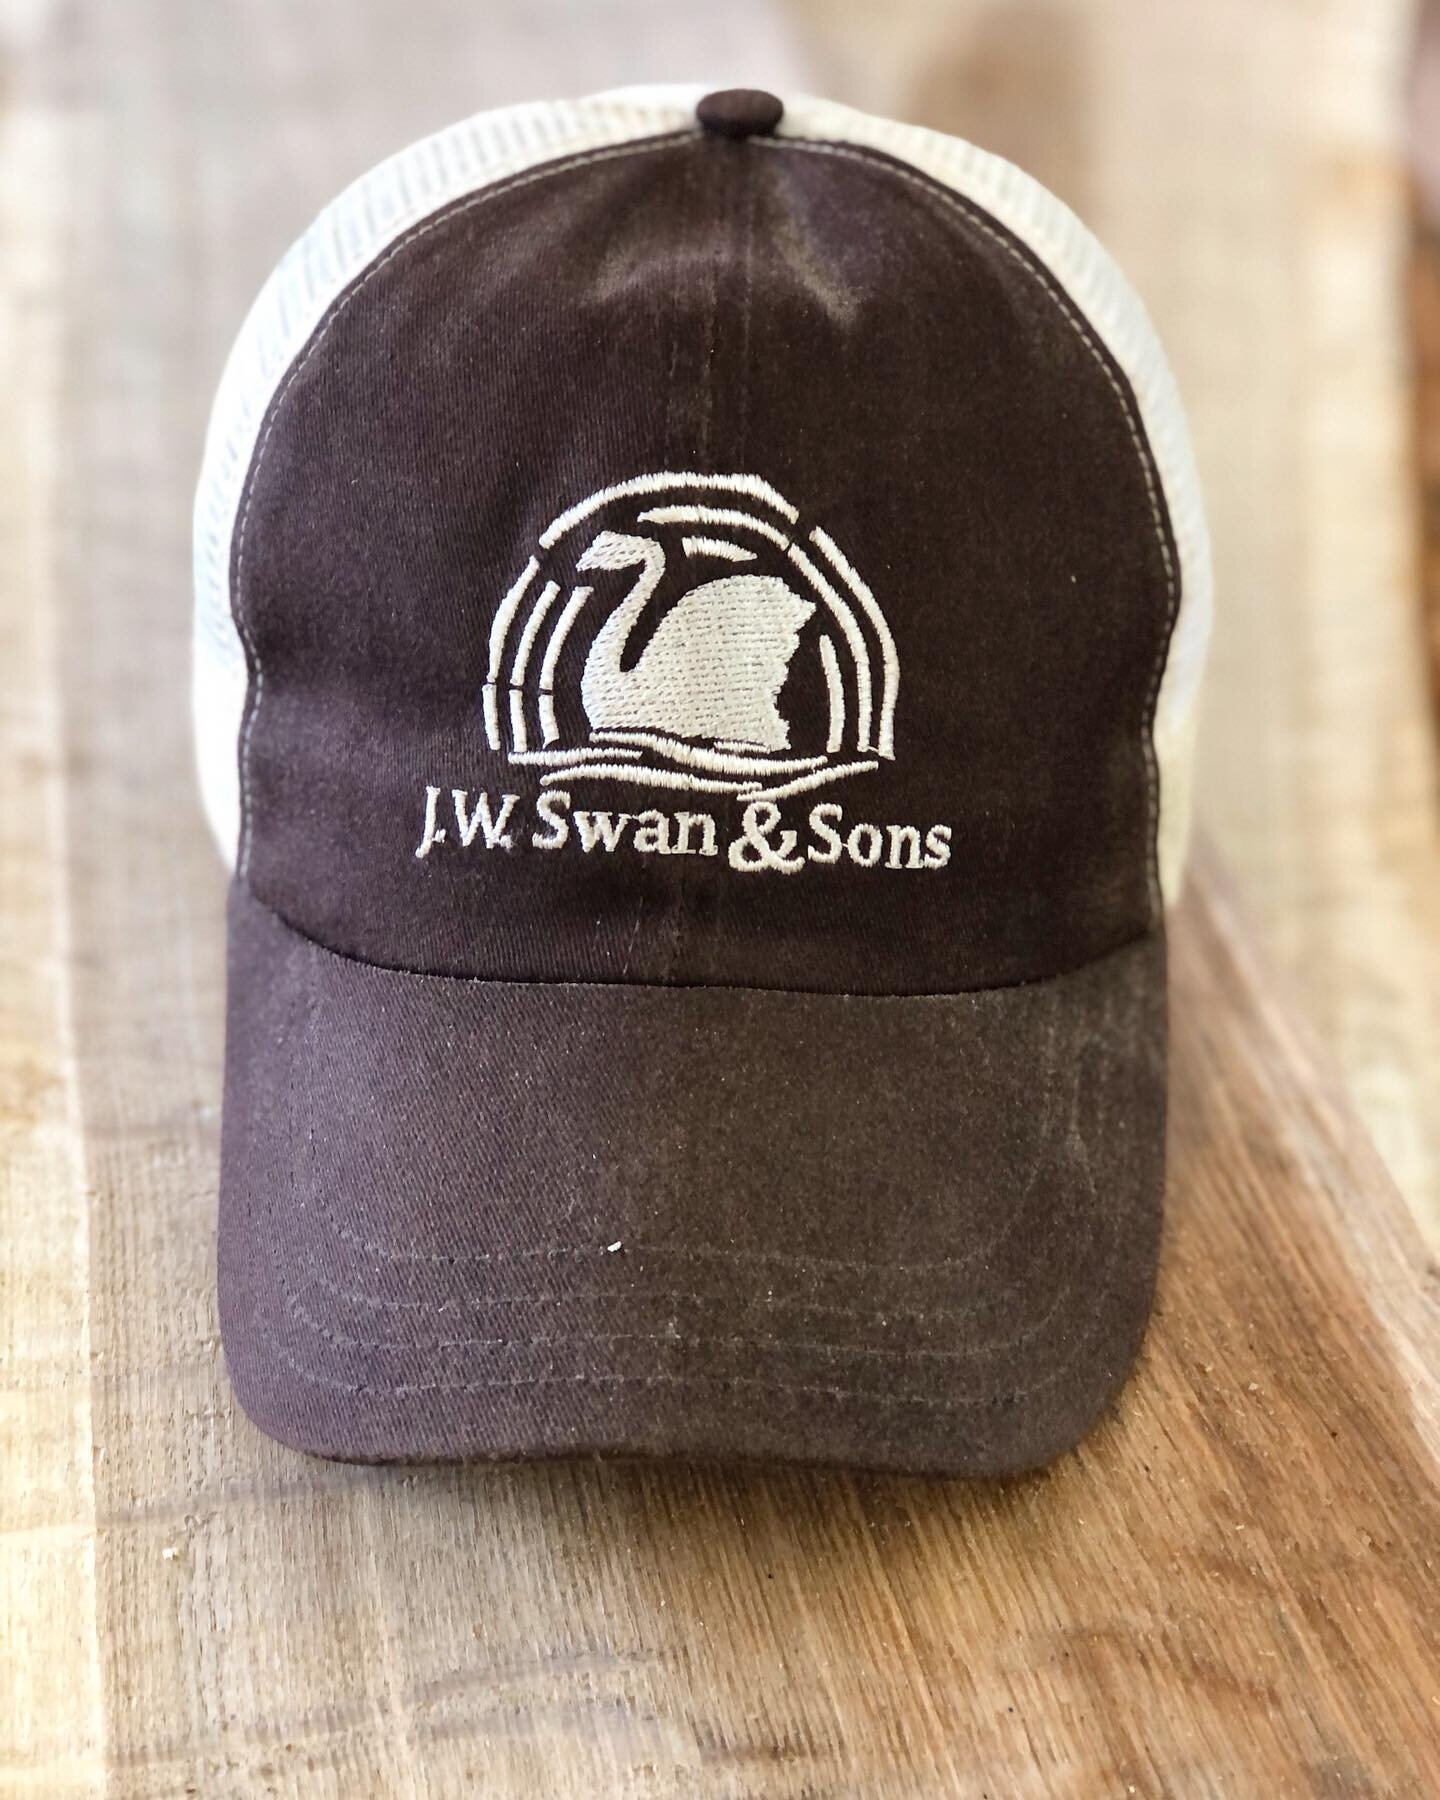 After Brian @capefalconbuilds posted this photo, I&rsquo;ve been getting messages about hat availability.  They&rsquo;re union made in the U.S., and embroidered locally in Ashland, WI.  36$ covers the hat and domestic shipping.  Forward!  Link in bio